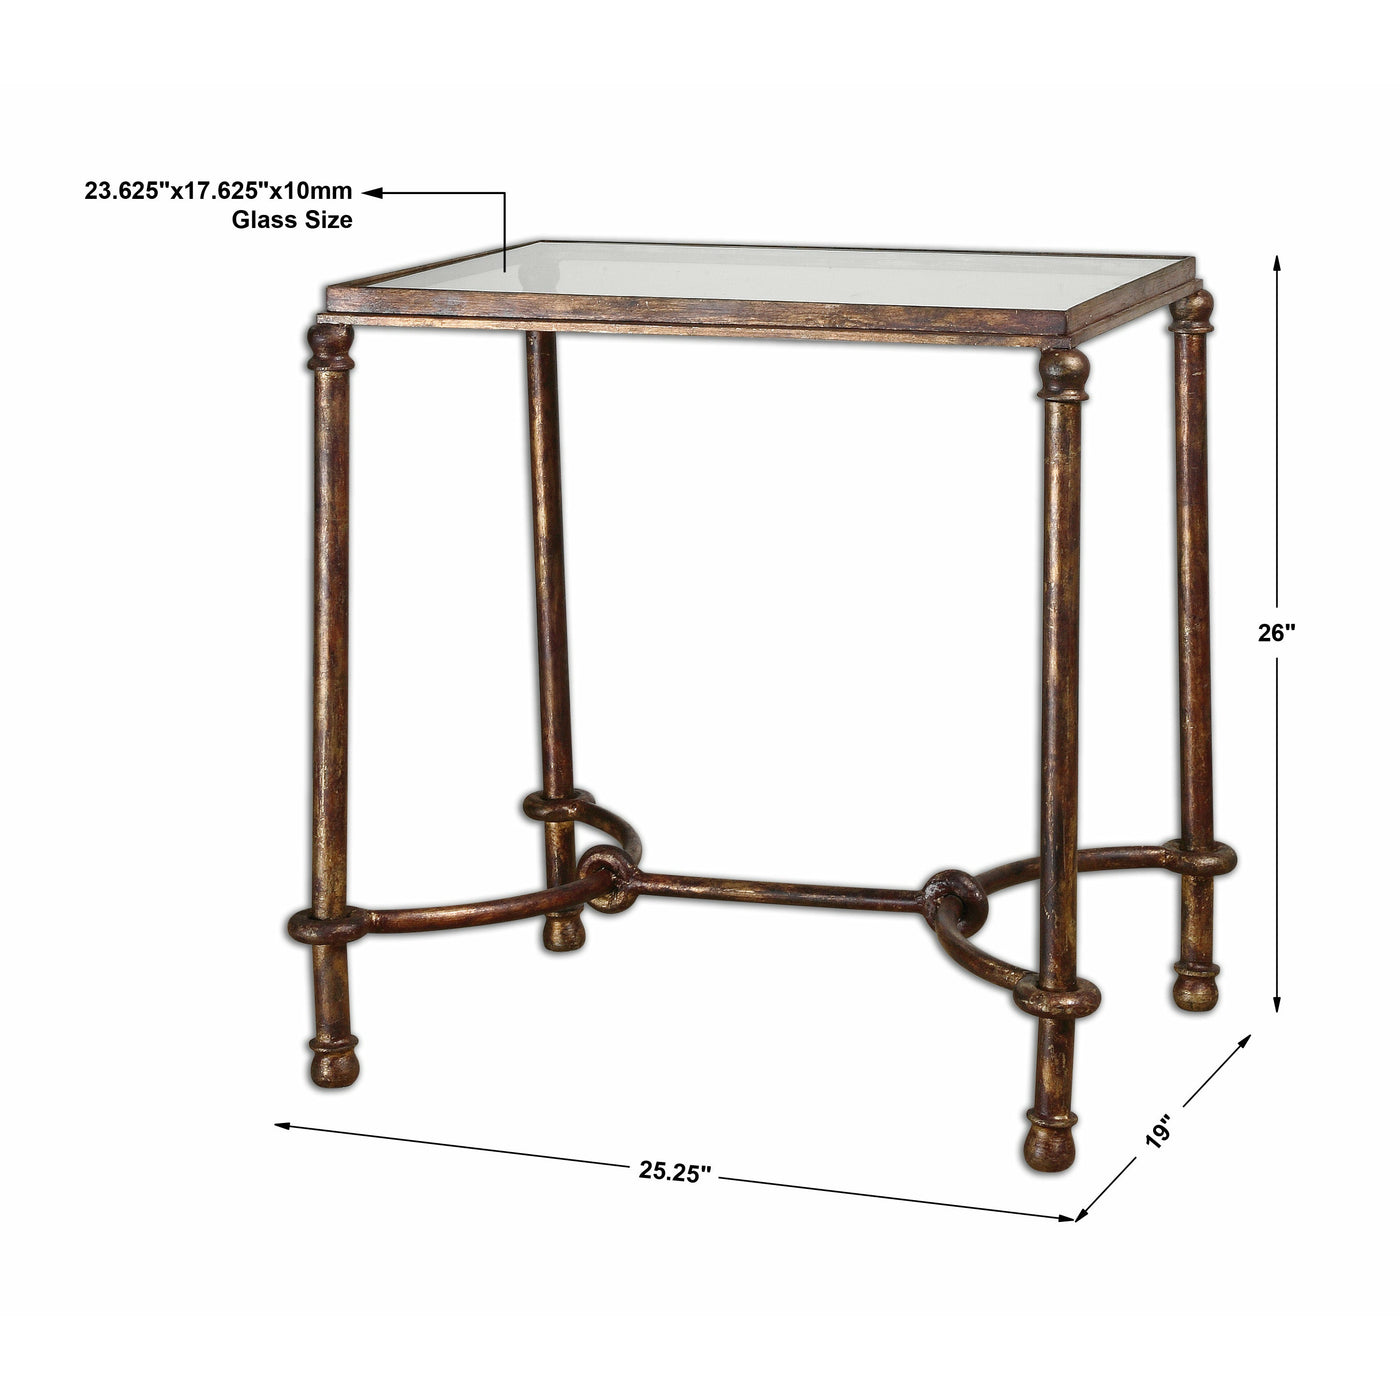 Uttermost Warring Iron End Table